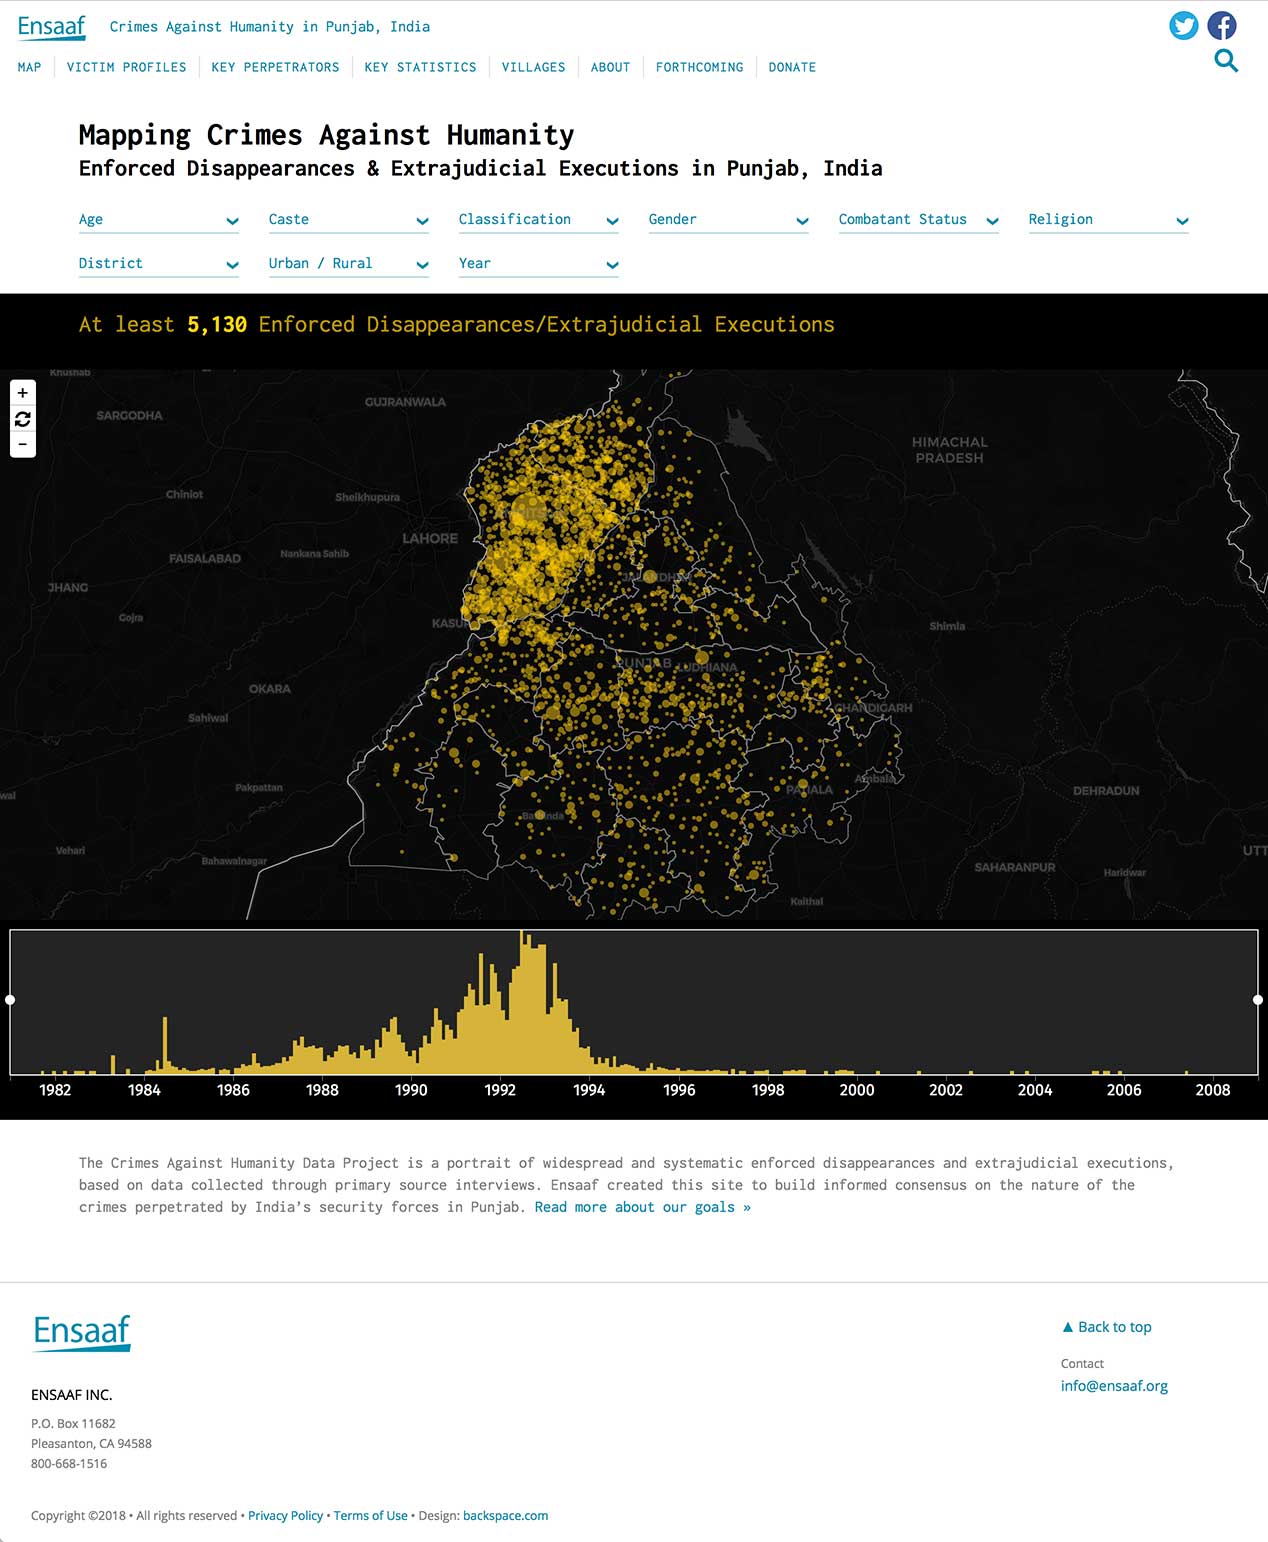 Ensaaf home page showing a map and timeline of documented cases.